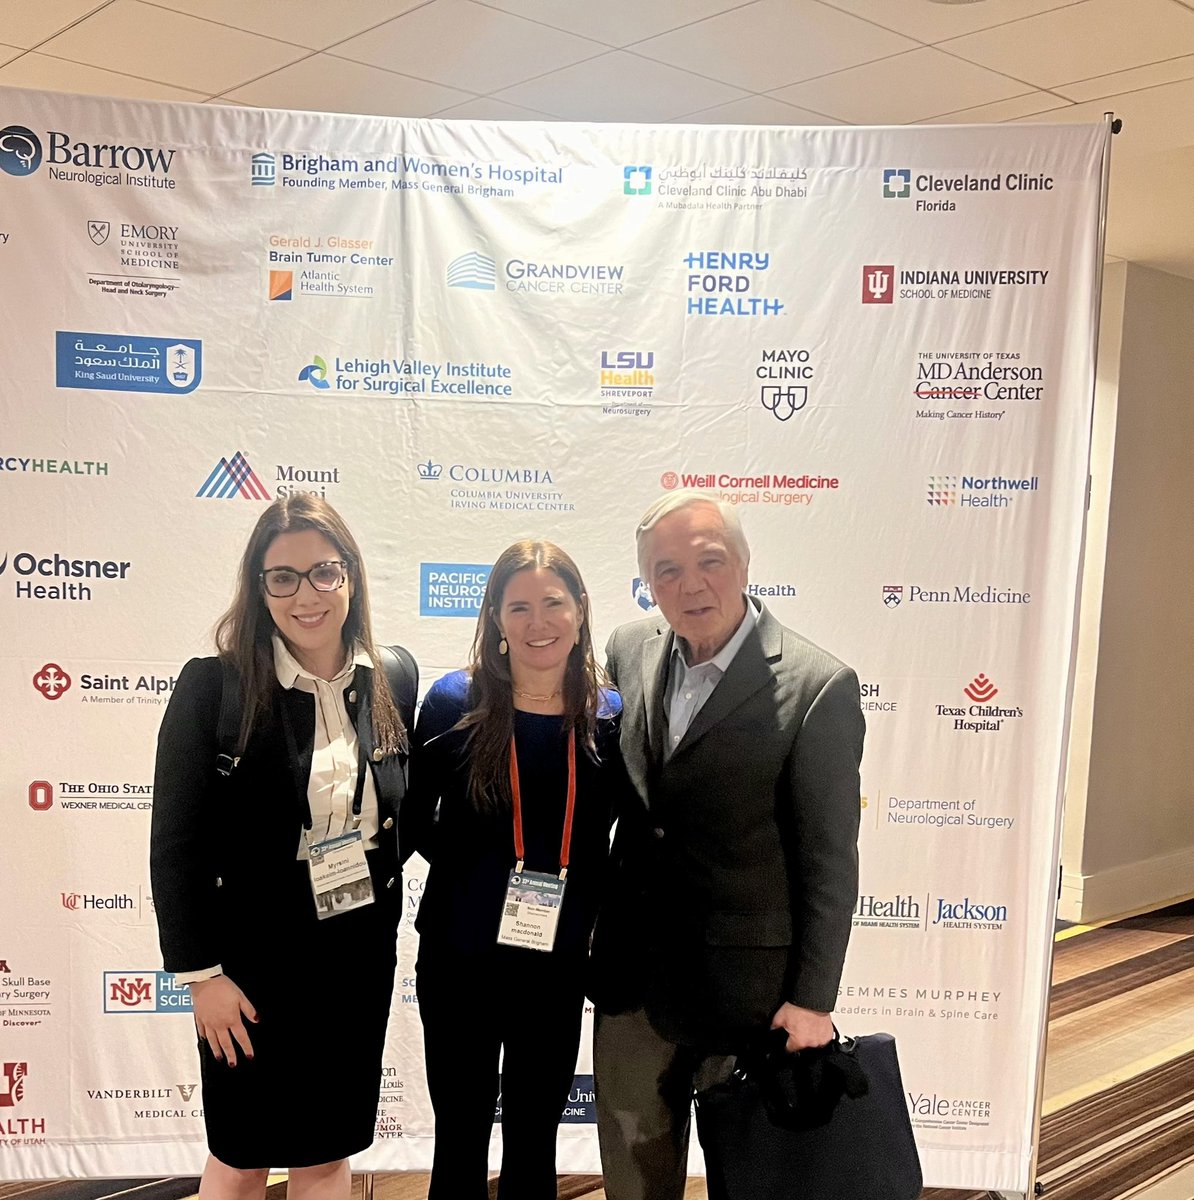 We had the privilege of spending time with Dr.Liebsch and hearing him lecture this past week at the North American Skull Base Society Meeting. @NASBSorg @MyrsiniIoakeim